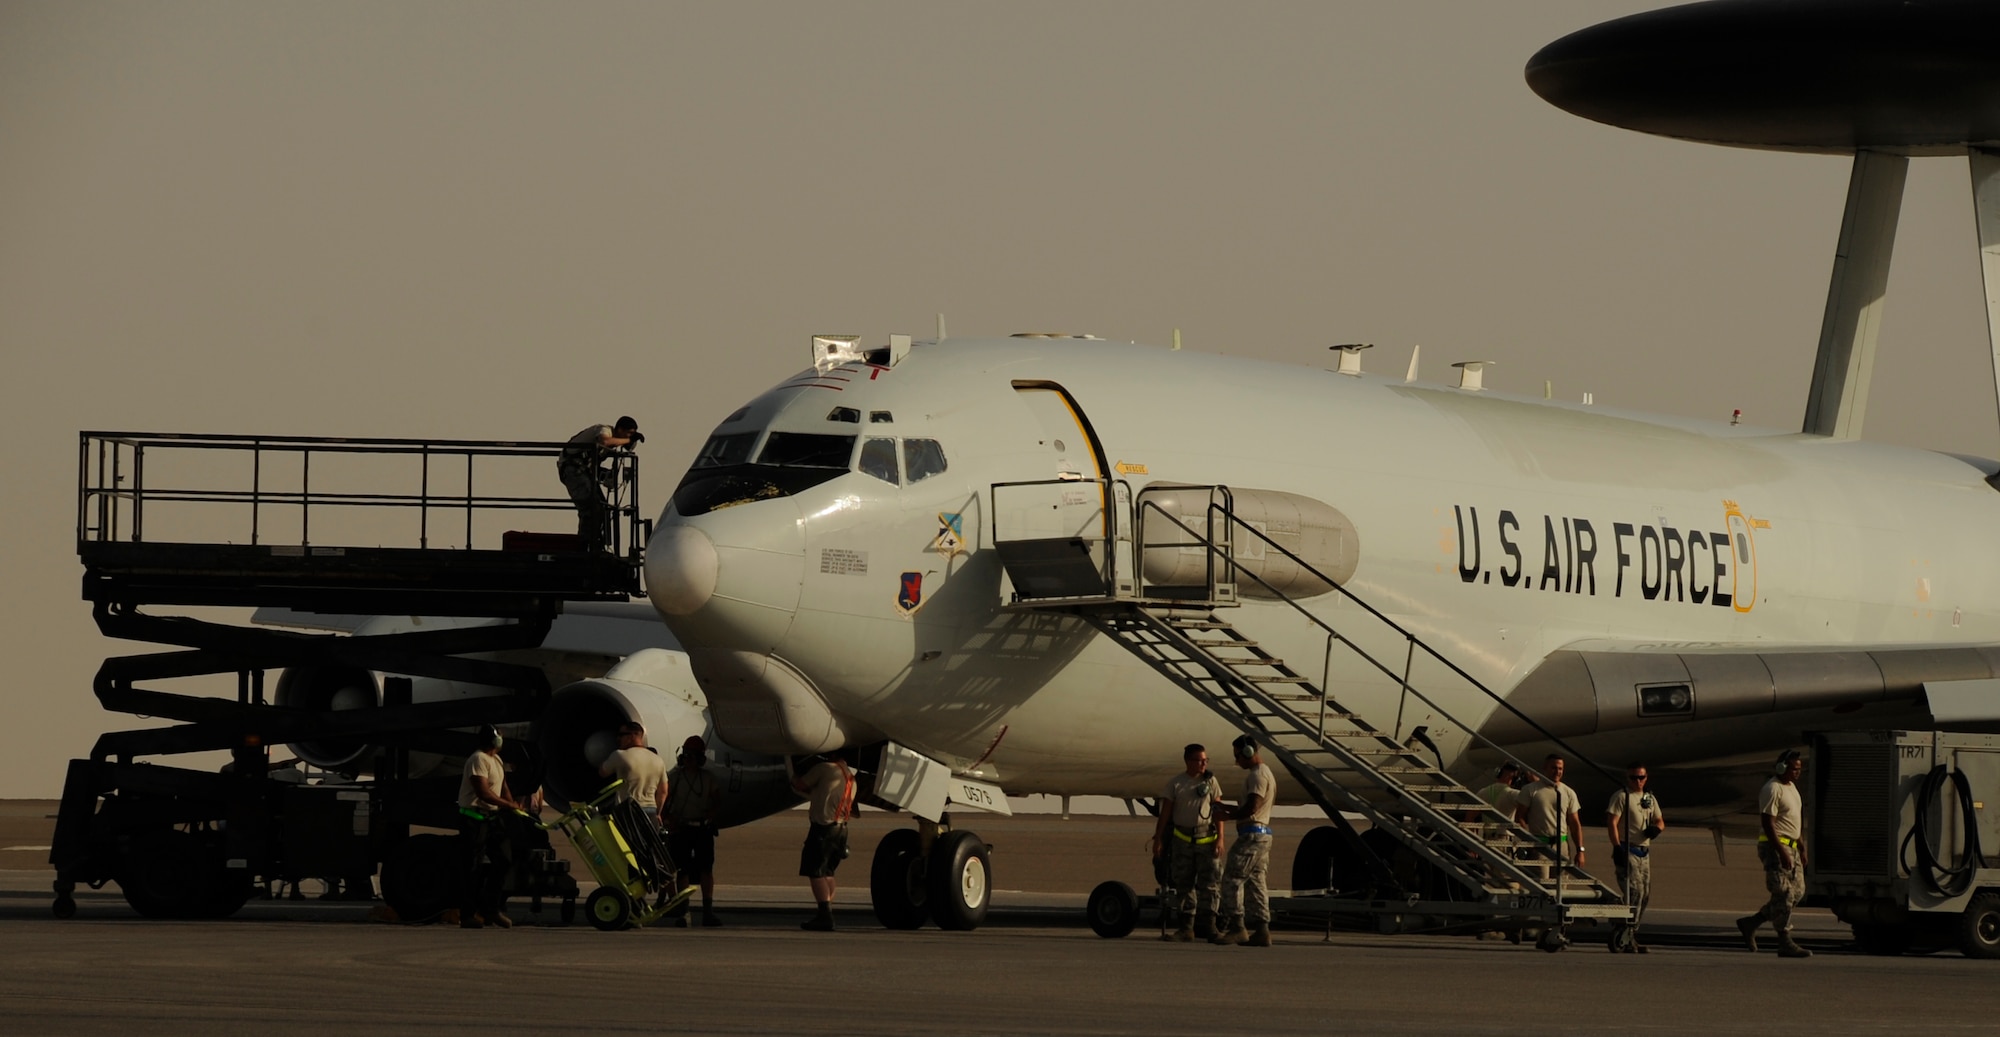 Airmen with the 380th Expeditionary Aircraft Maintenance Squadron E-3 Sentry Aircraft Maintenance Unit recover an E-3 Sentry after a flight May 25, 2017, at an undisclosed location in southwest Asia. To prepare the aircraft to fly again not only do AMU Airmen perform day-to-day maintenance, but also specialize in a wide variety of systems such as radio, navigation, radar, coolant, and computer systems. (U.S. Air Force photo by Senior Airman Preston Webb)